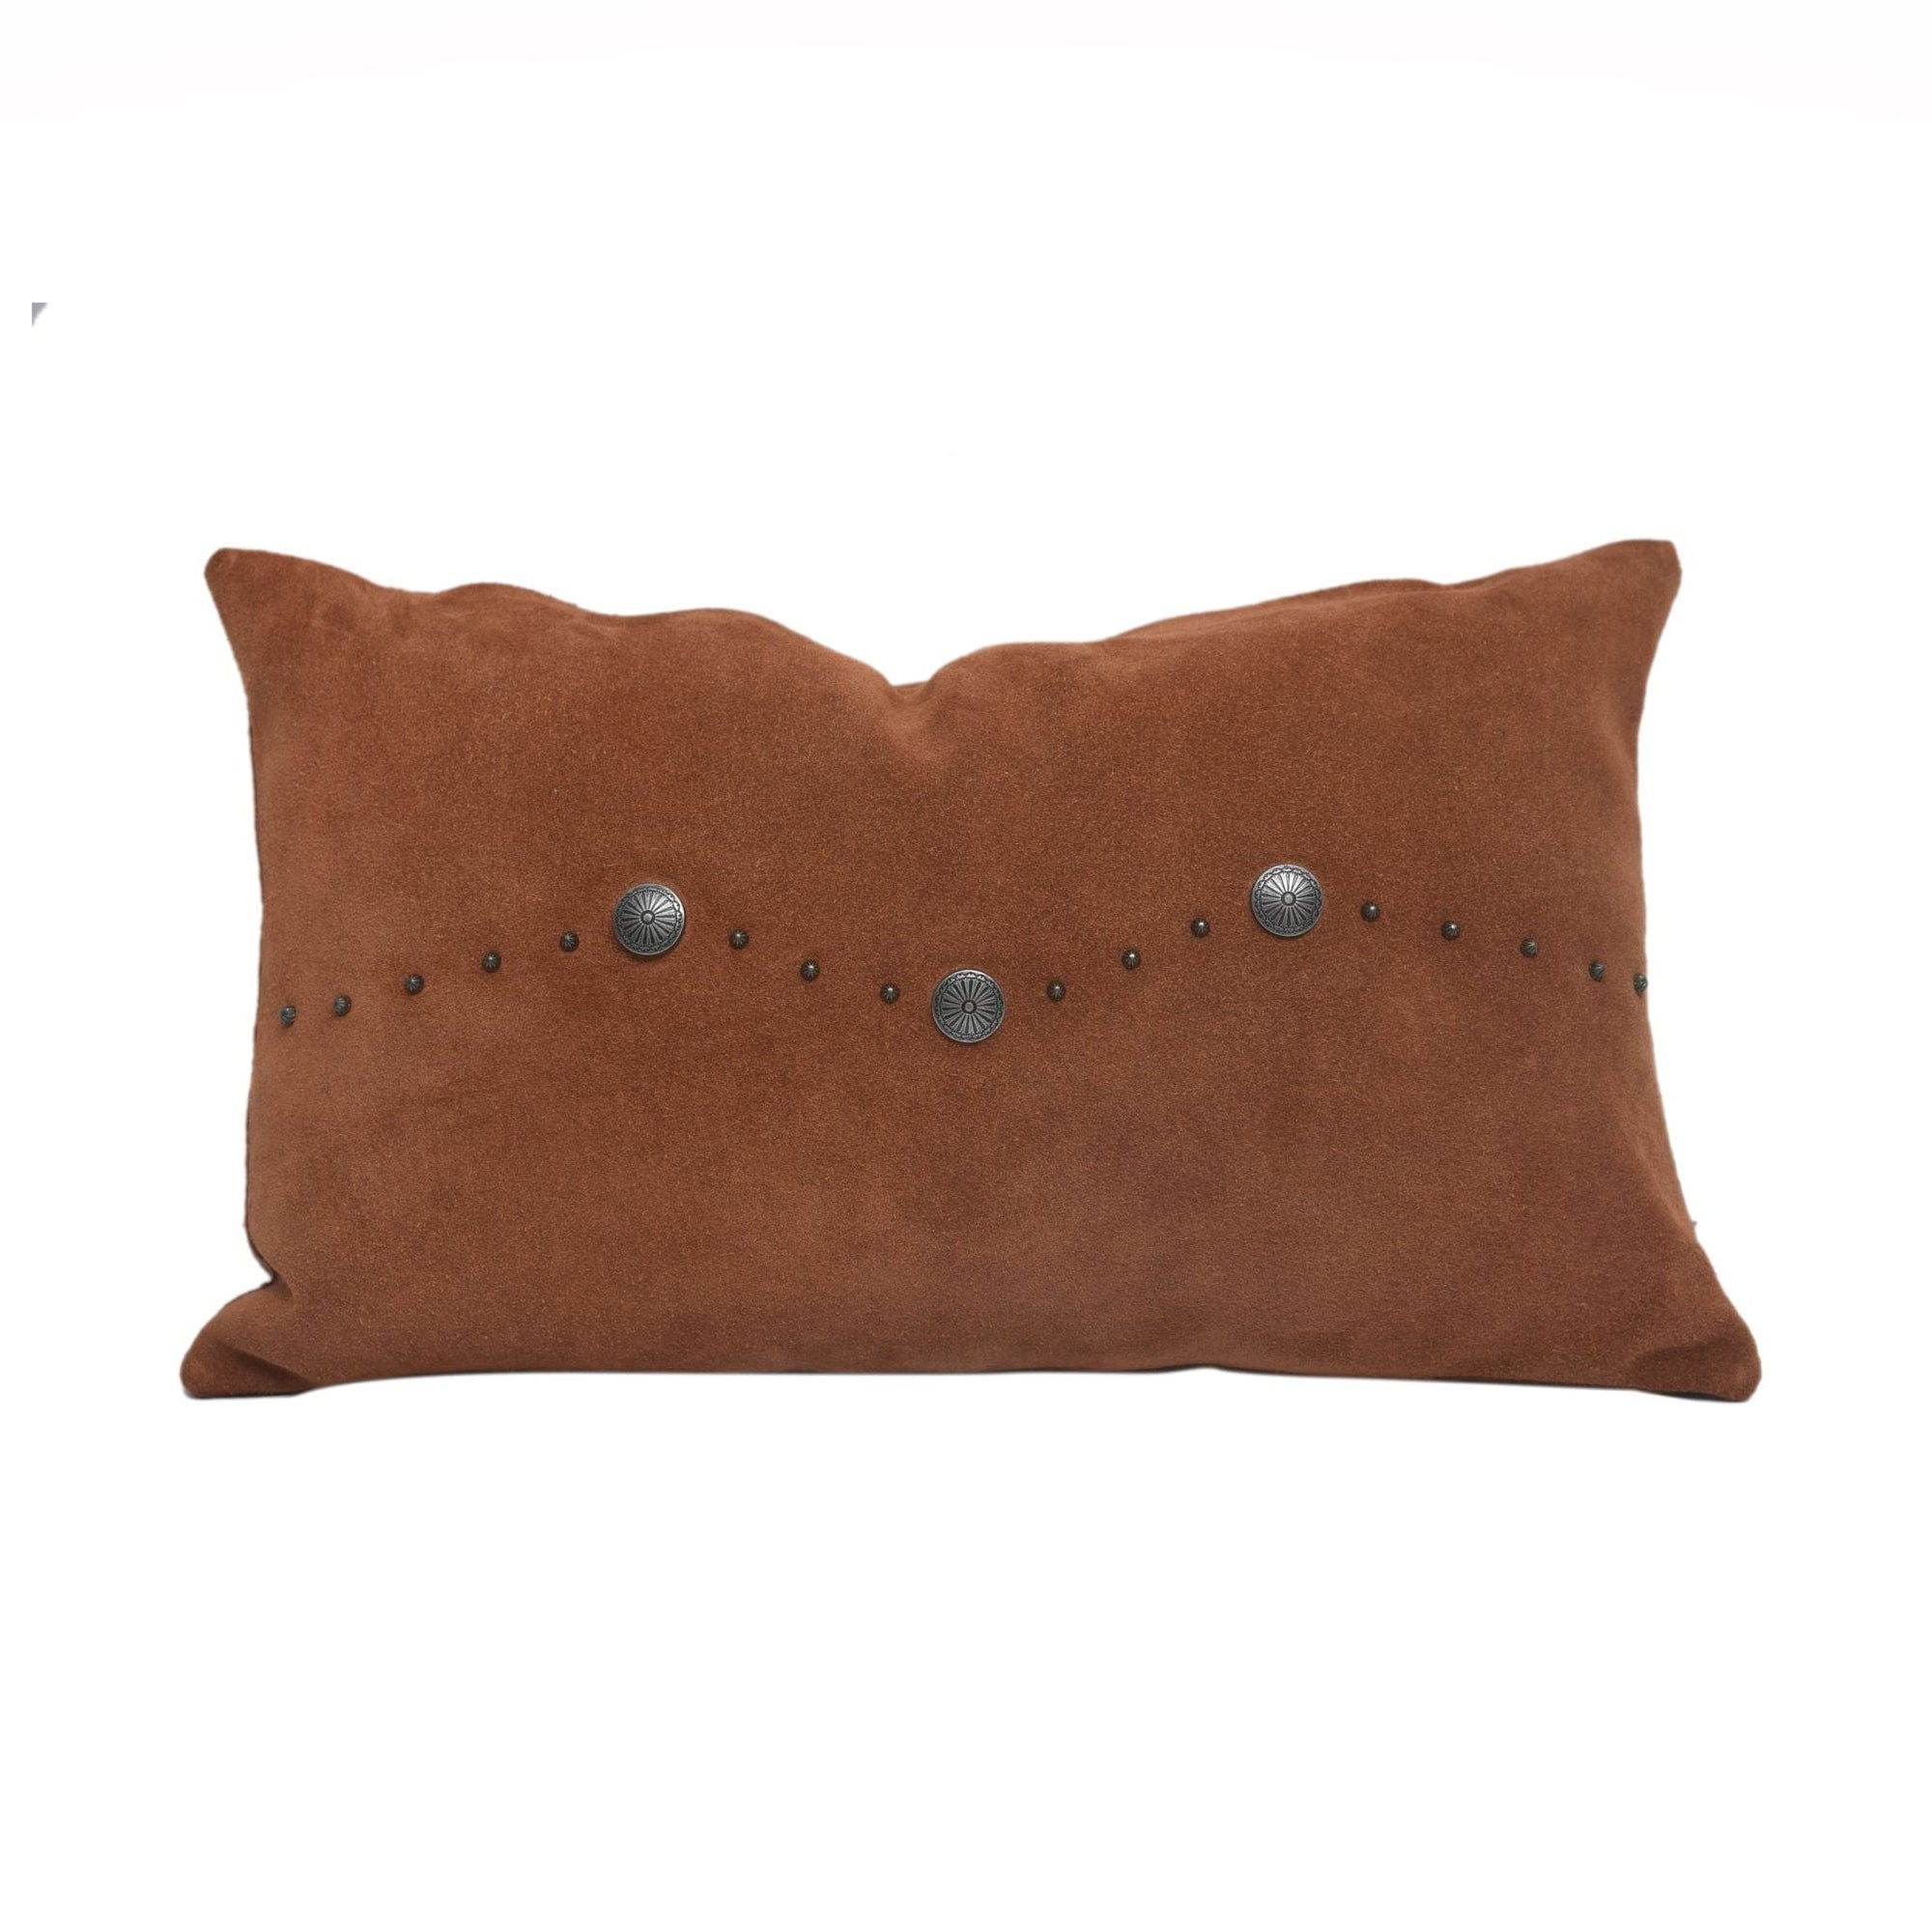 Western Suede Antique Silver Concho & Studded Lumbar Pillow, Black